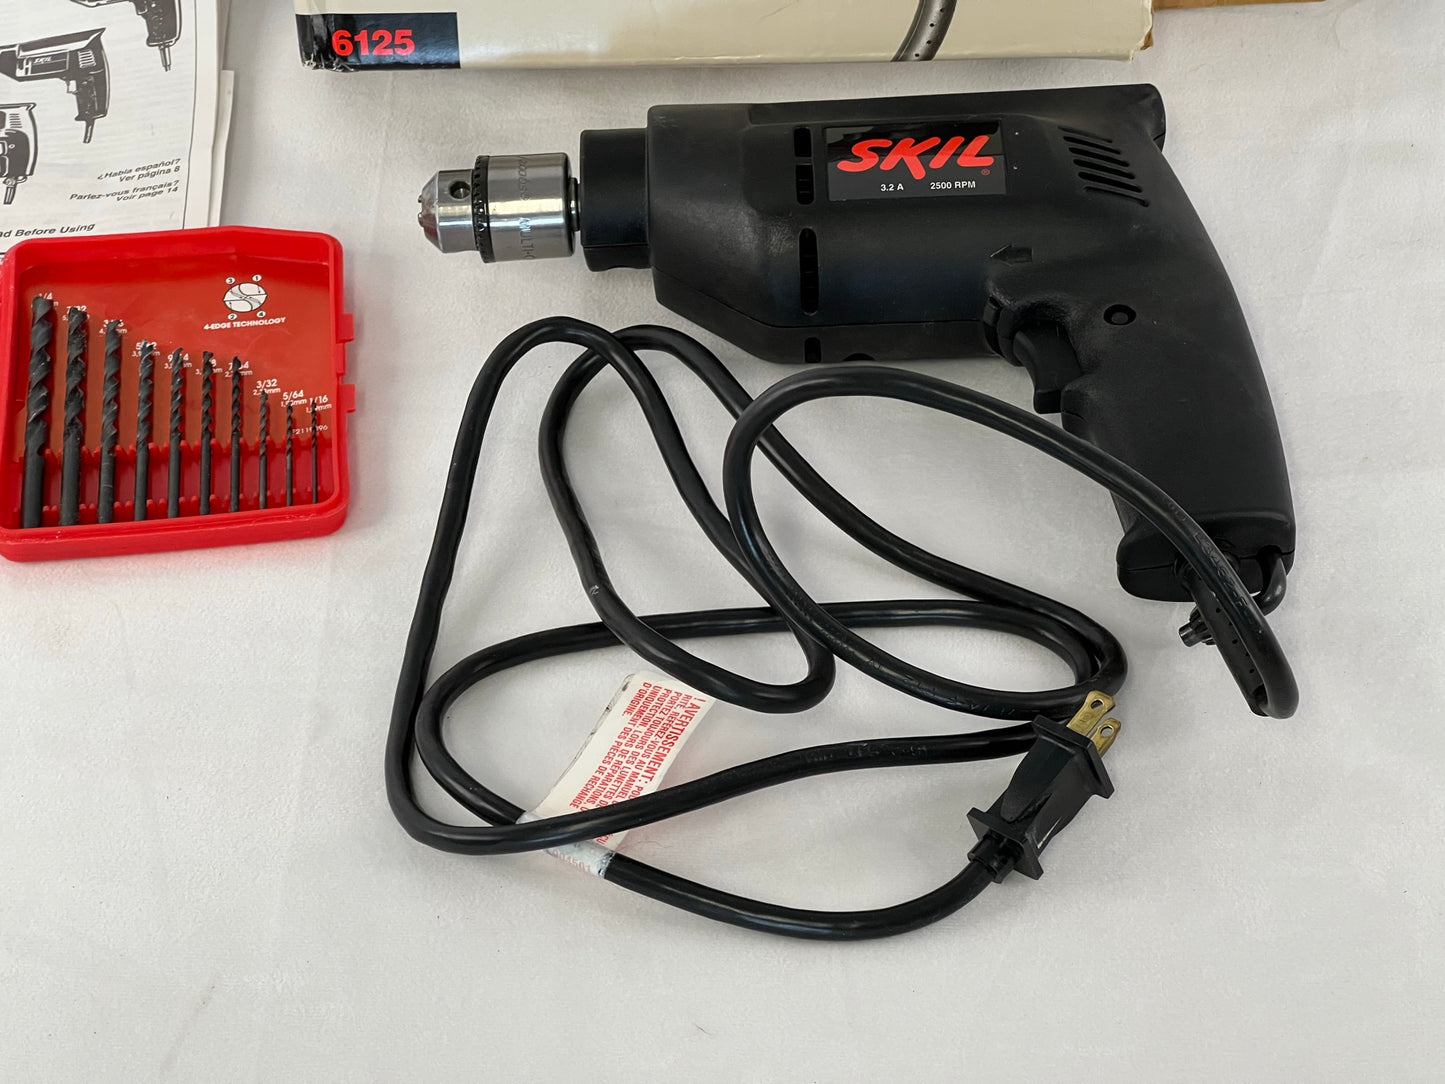 Home Repair Skil 3.8 Electric Drill As New In Box